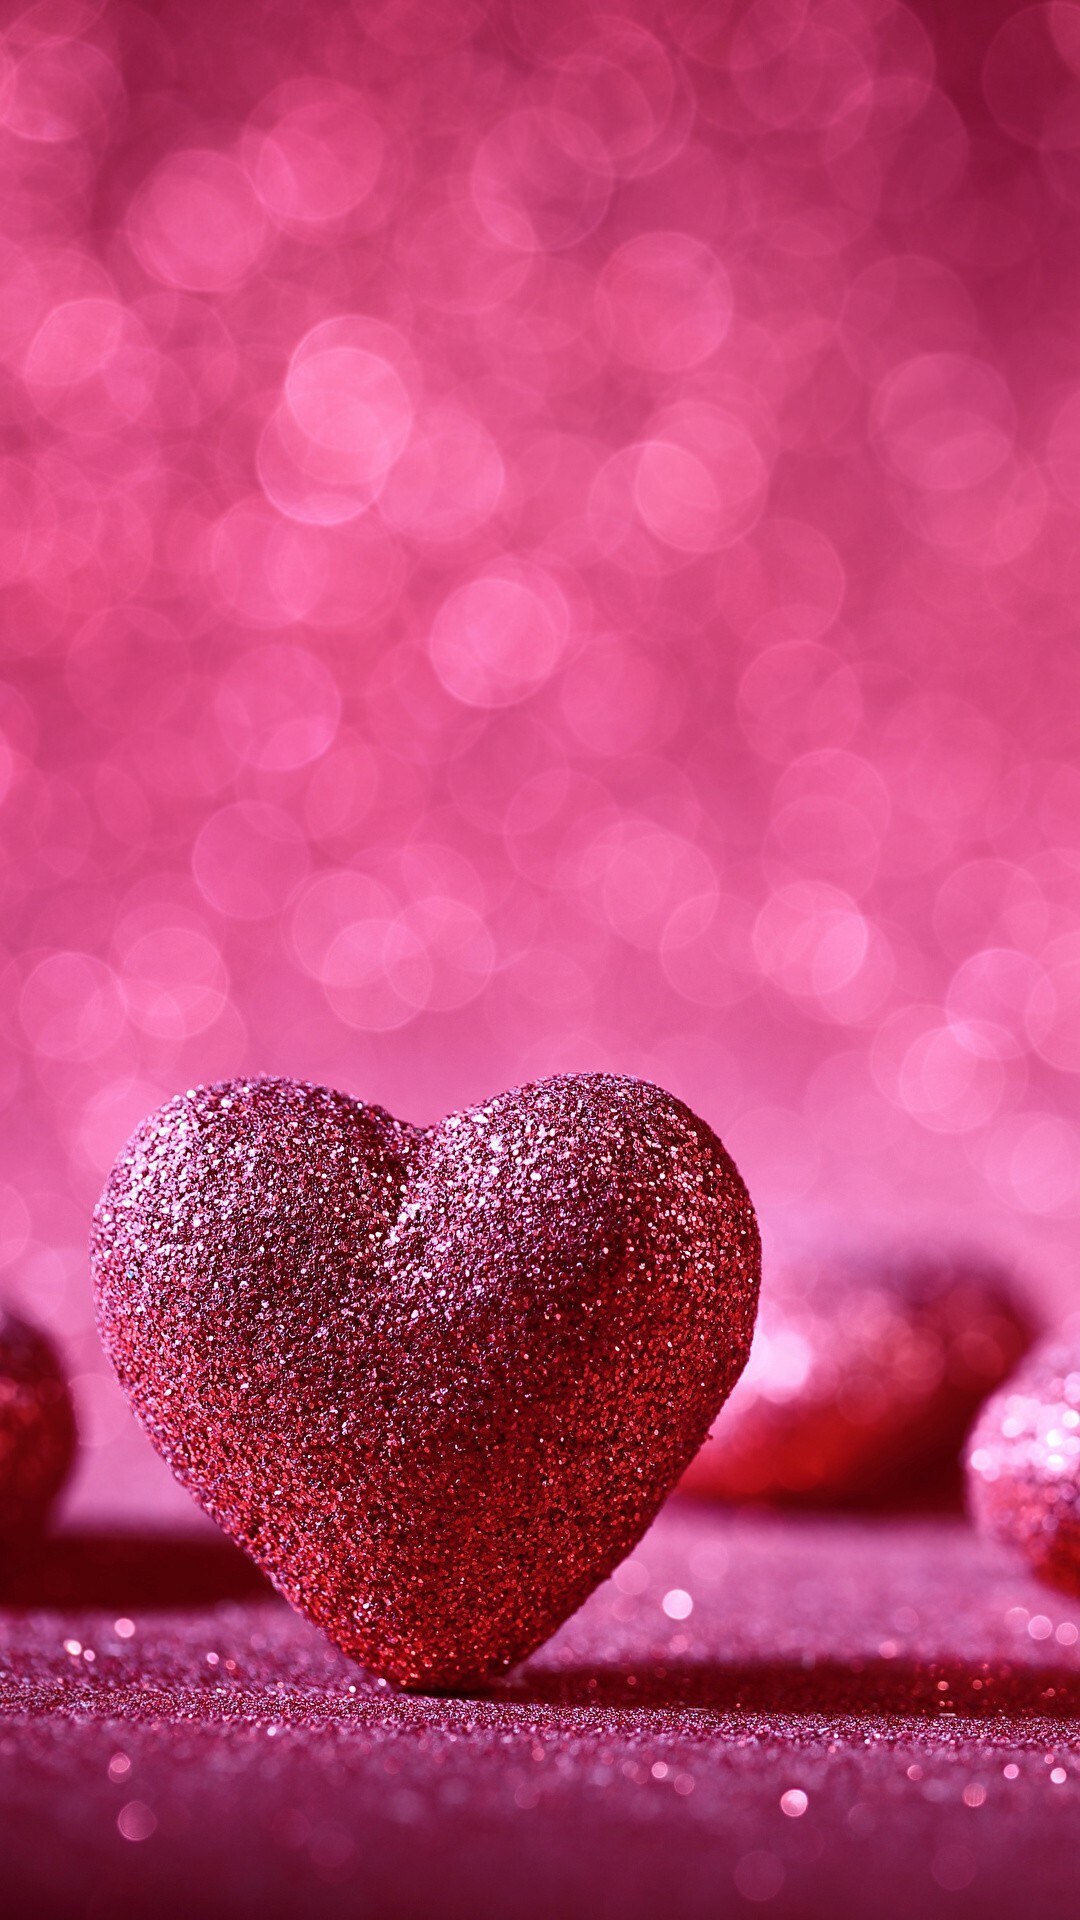 HD Valentine's Day, Heartwarming wallpapers, Romantic vibes, Love-filled imagery, 1080x1920 Full HD Phone